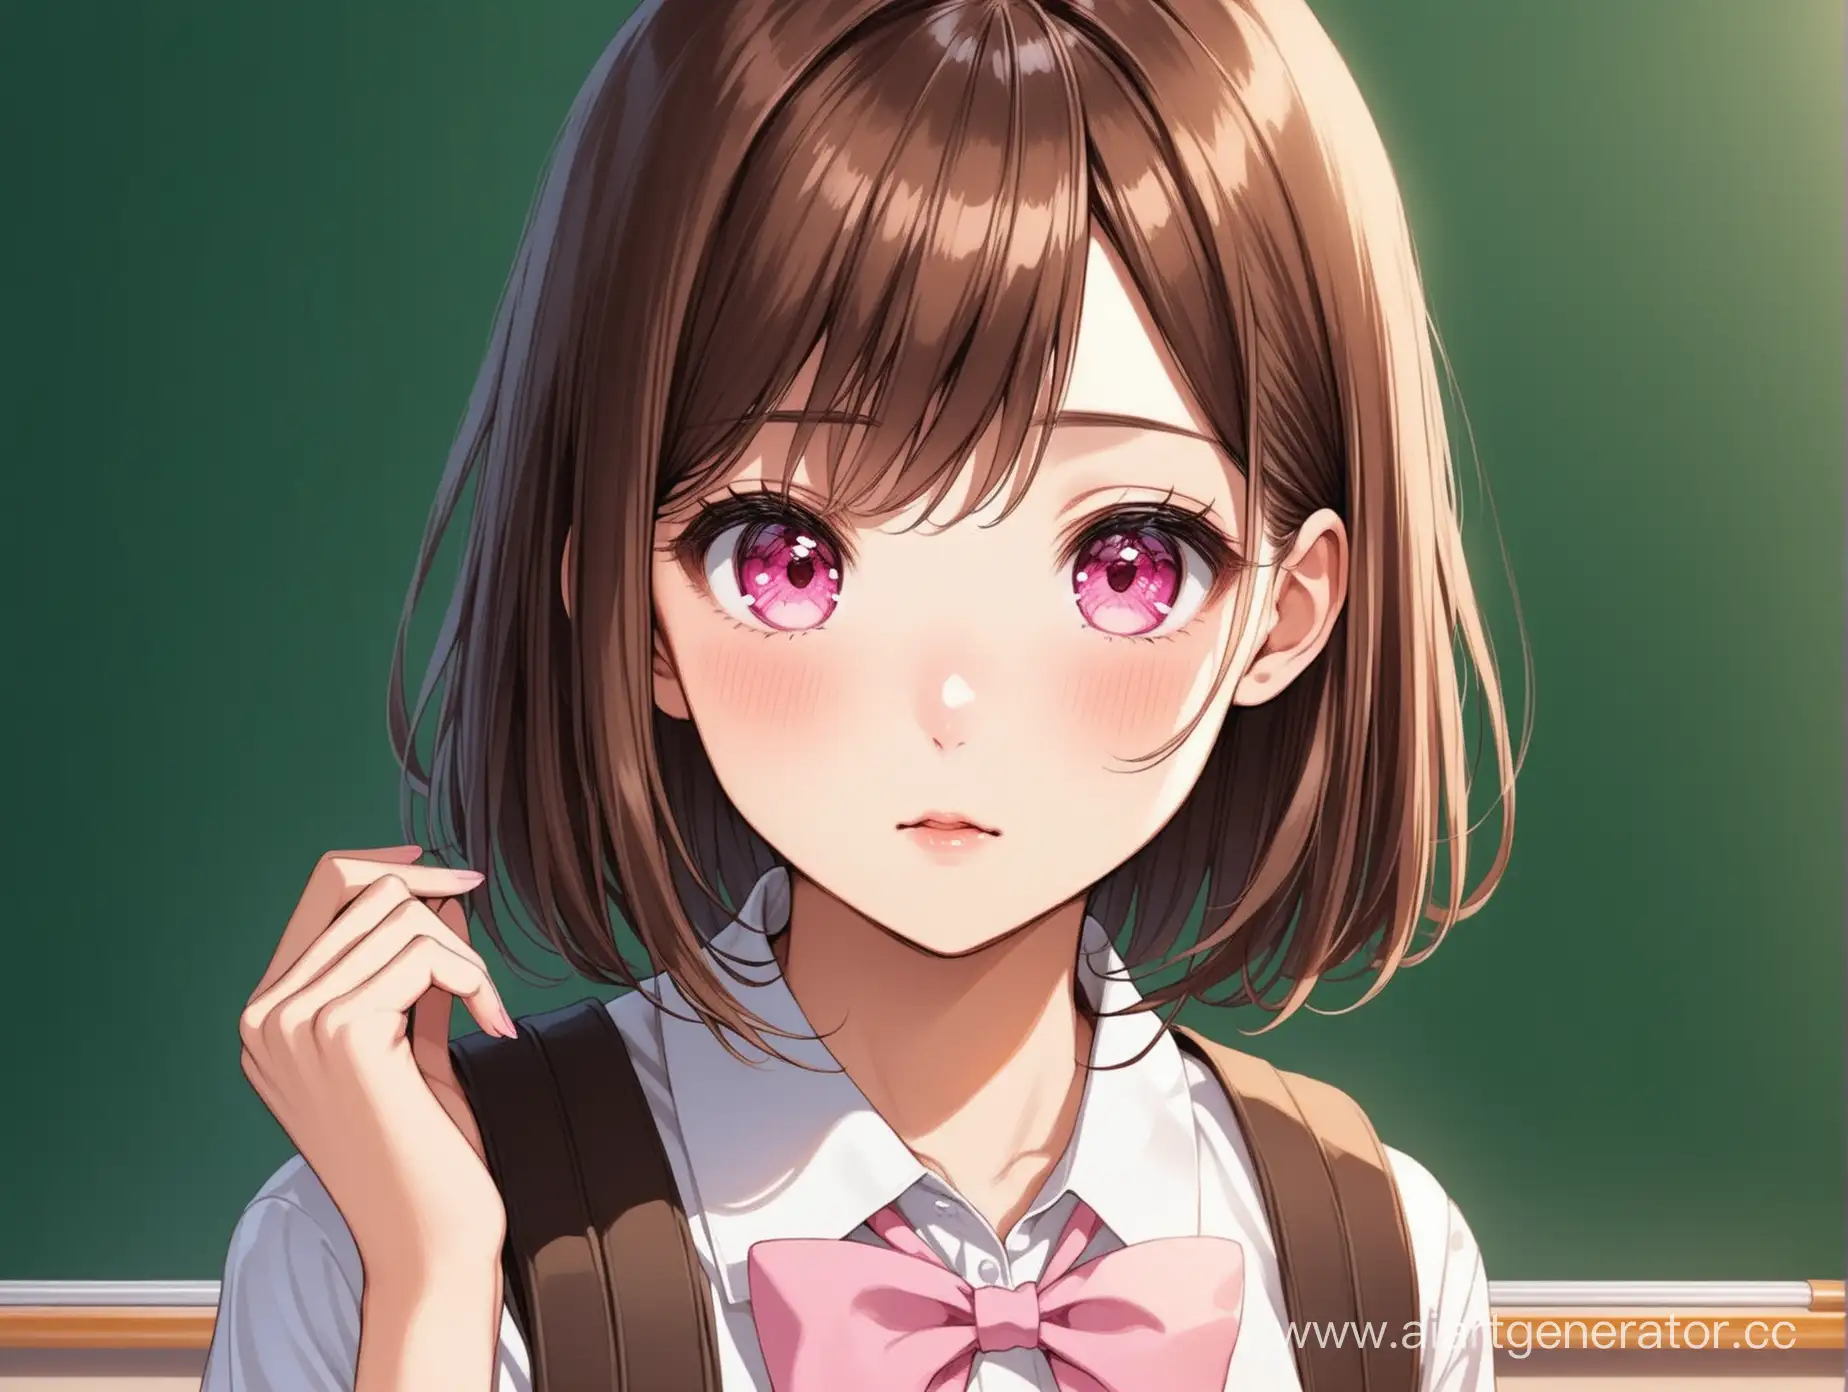 Adorable-School-Girl-with-Brown-Hair-and-Pink-Eyes-Smiling